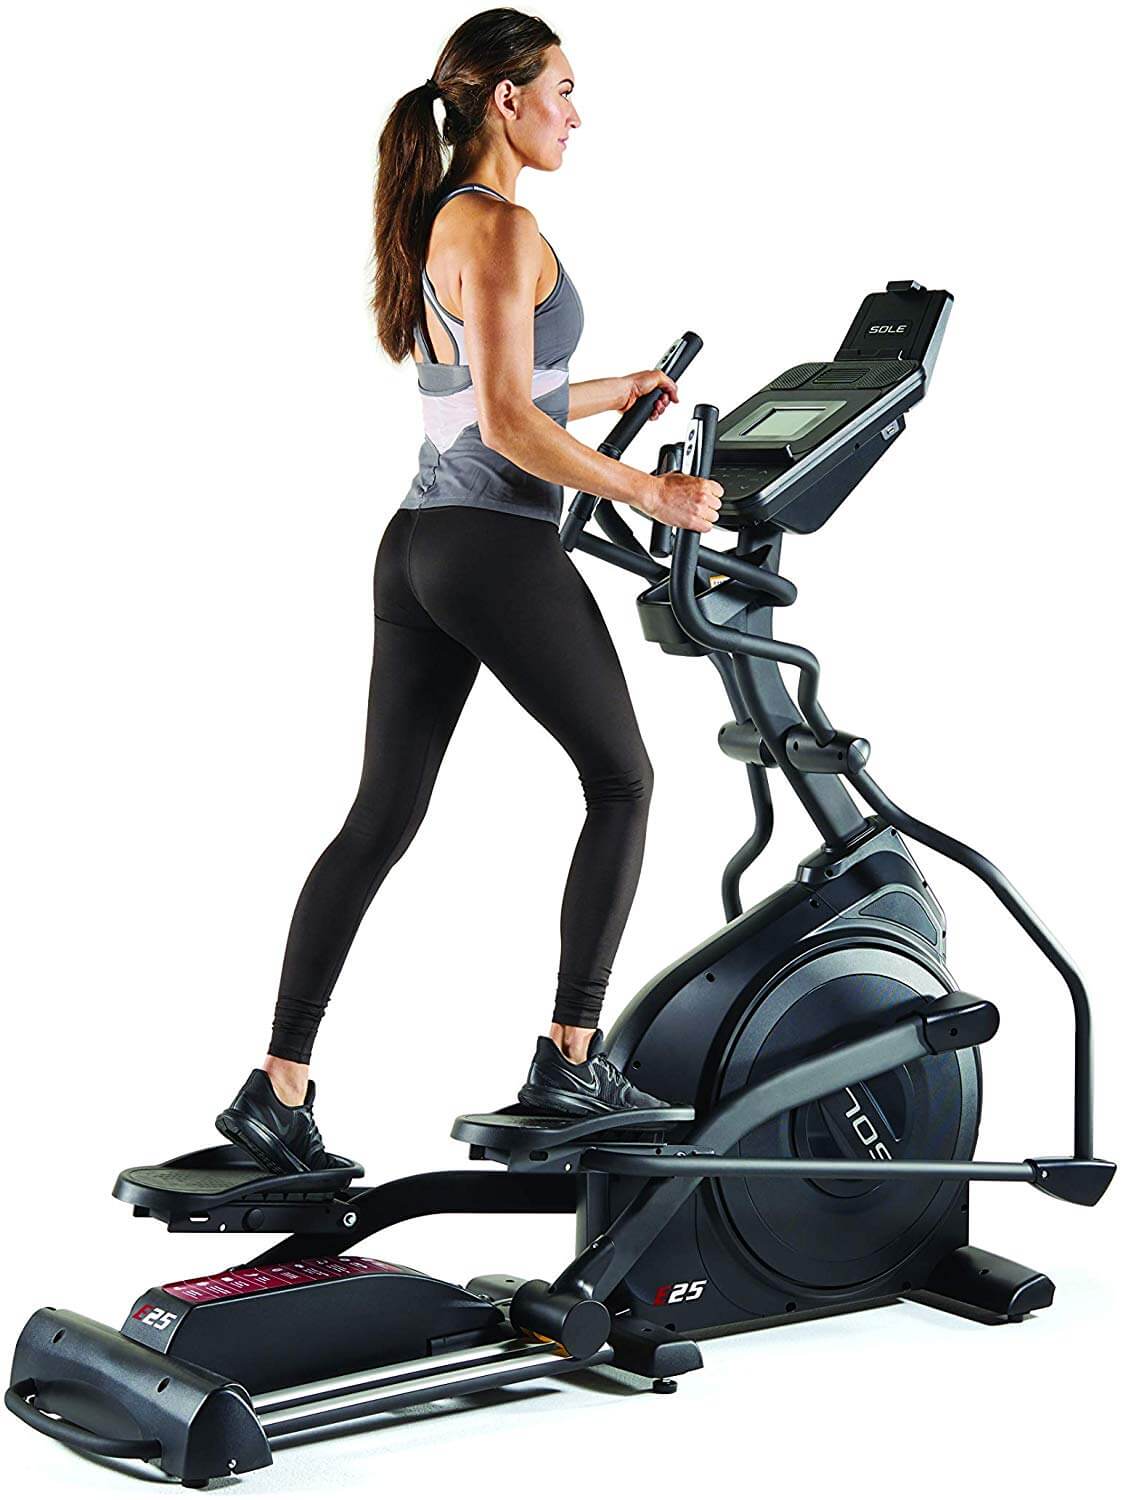 Sole Fitness E25 elliptical trainer Review